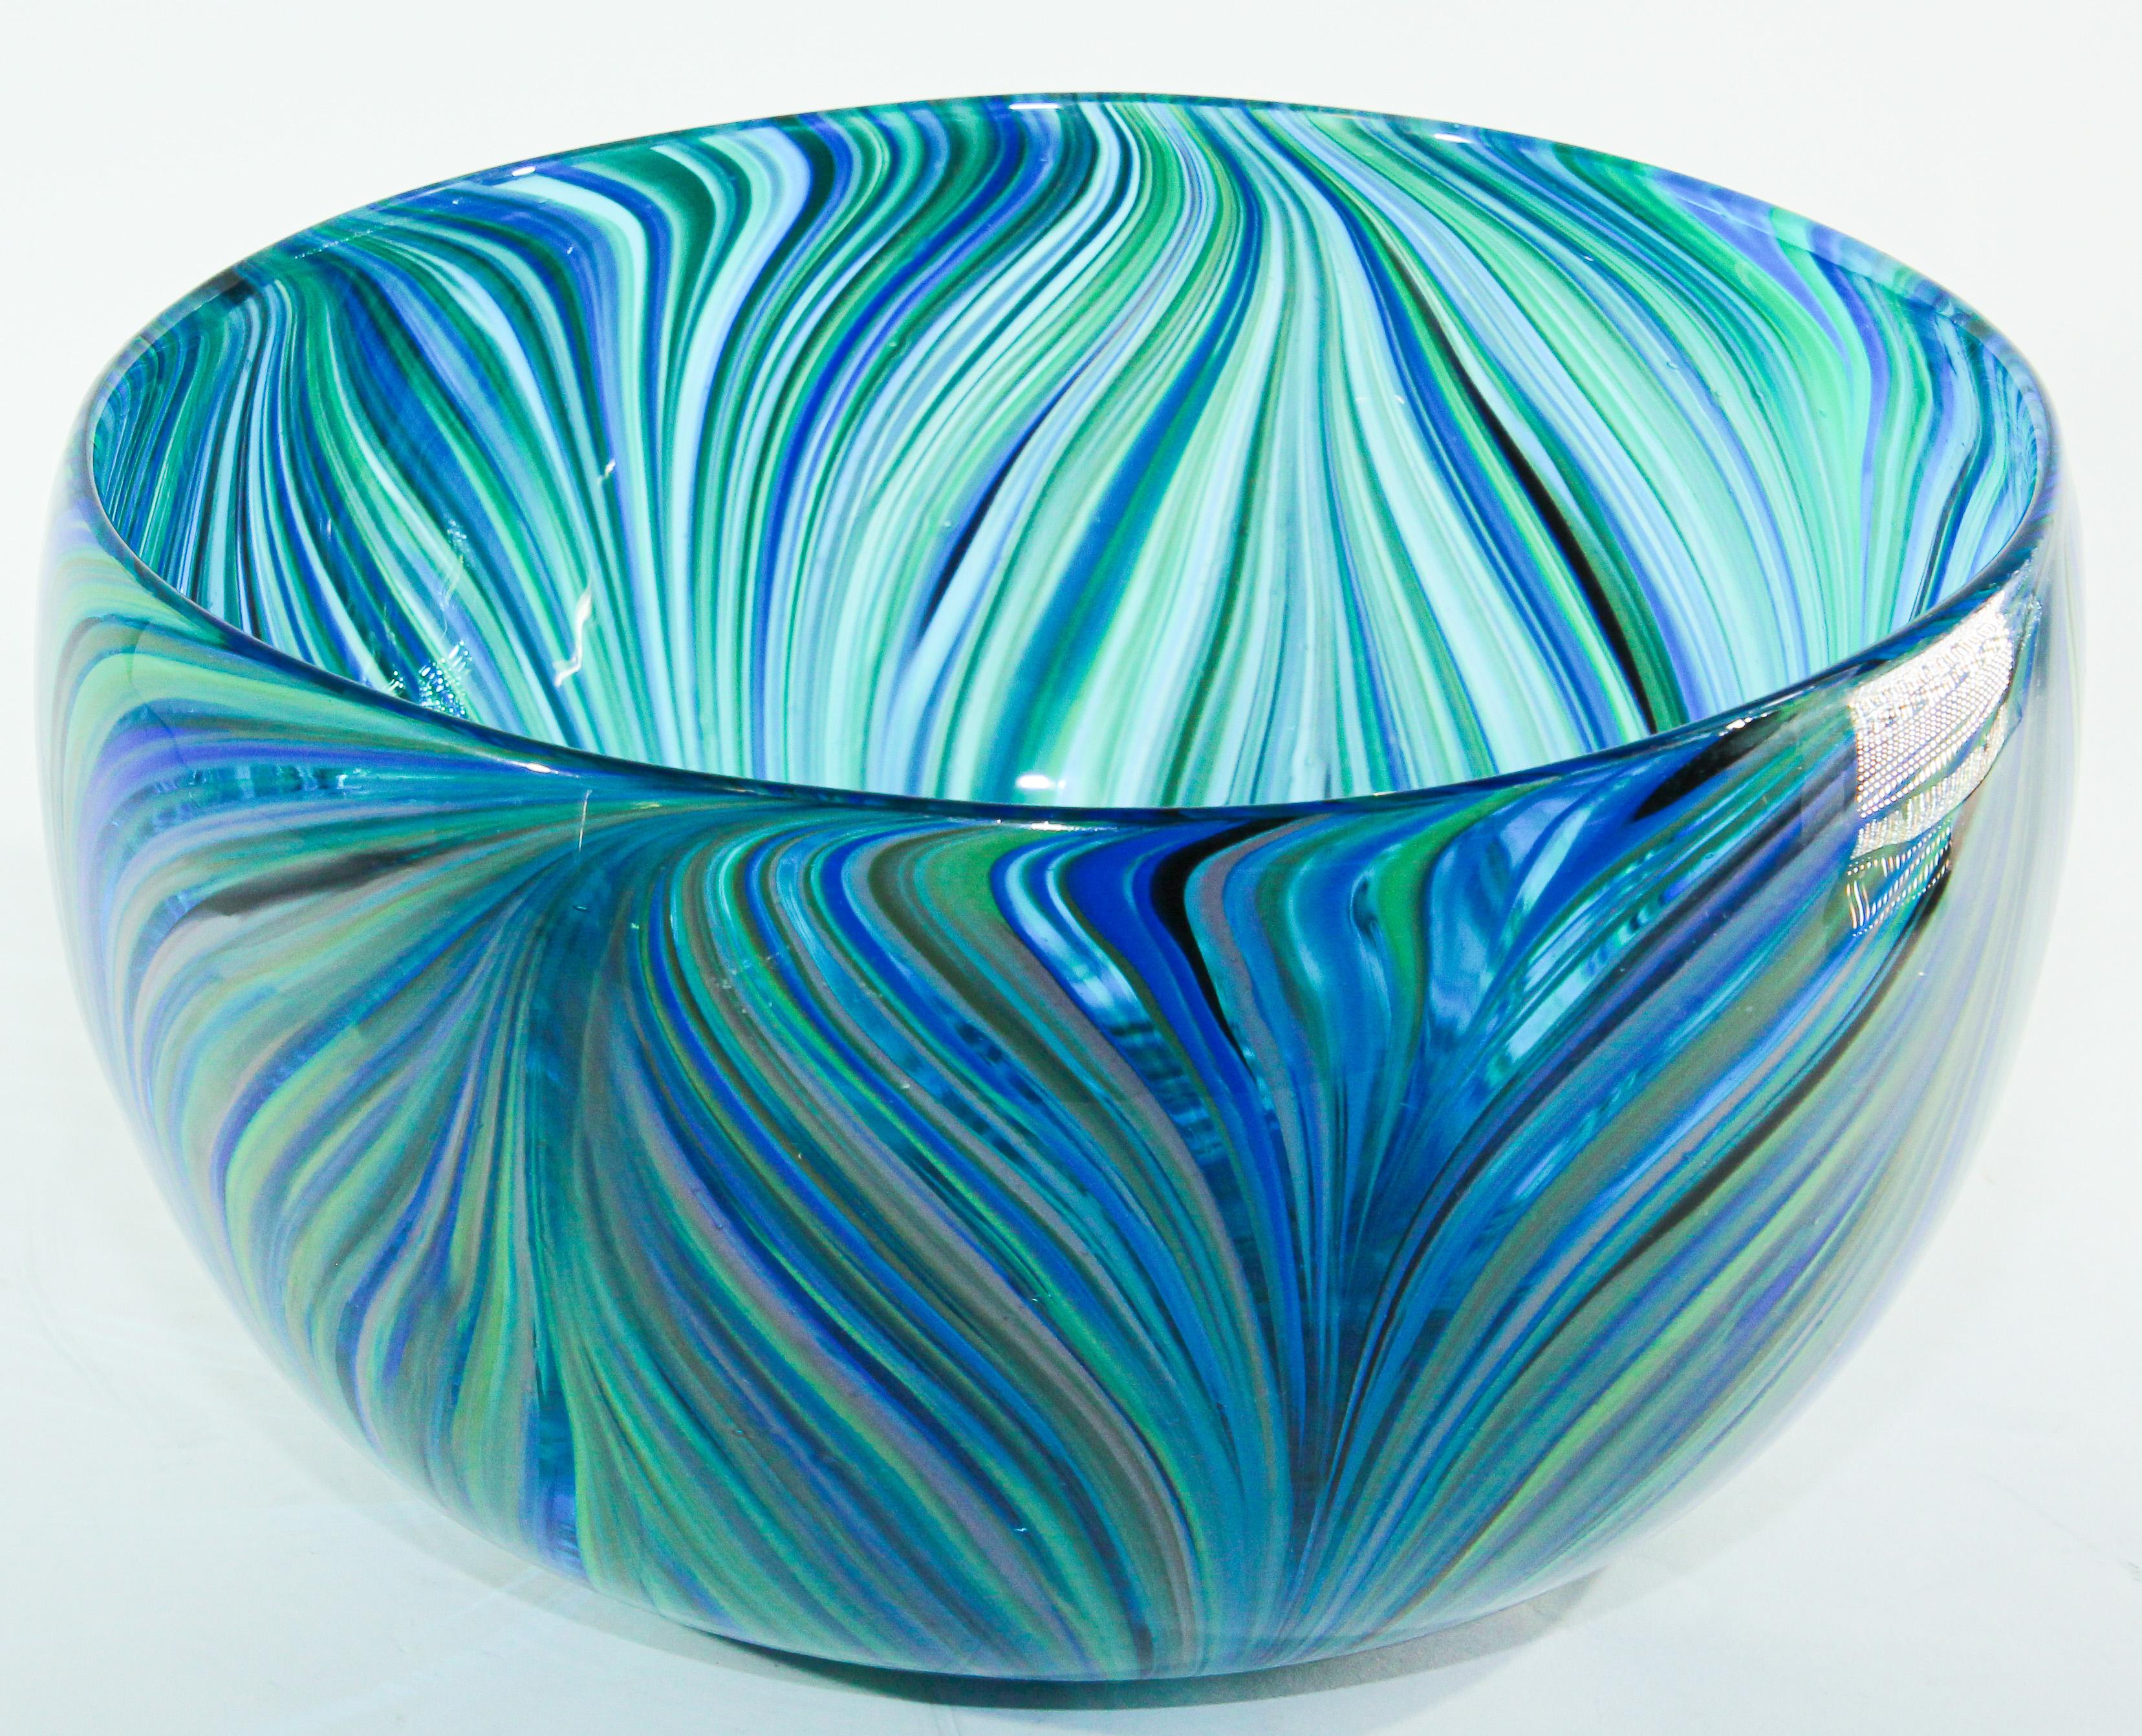 Large Art Glass Bowl in blue and green peacock colors. 
Large vintage exquisite post modern decorative hand blown Murano style art crystal glass bowl with a swirl stylized design in an amazing royal cobalt blue, turquoise and green and other